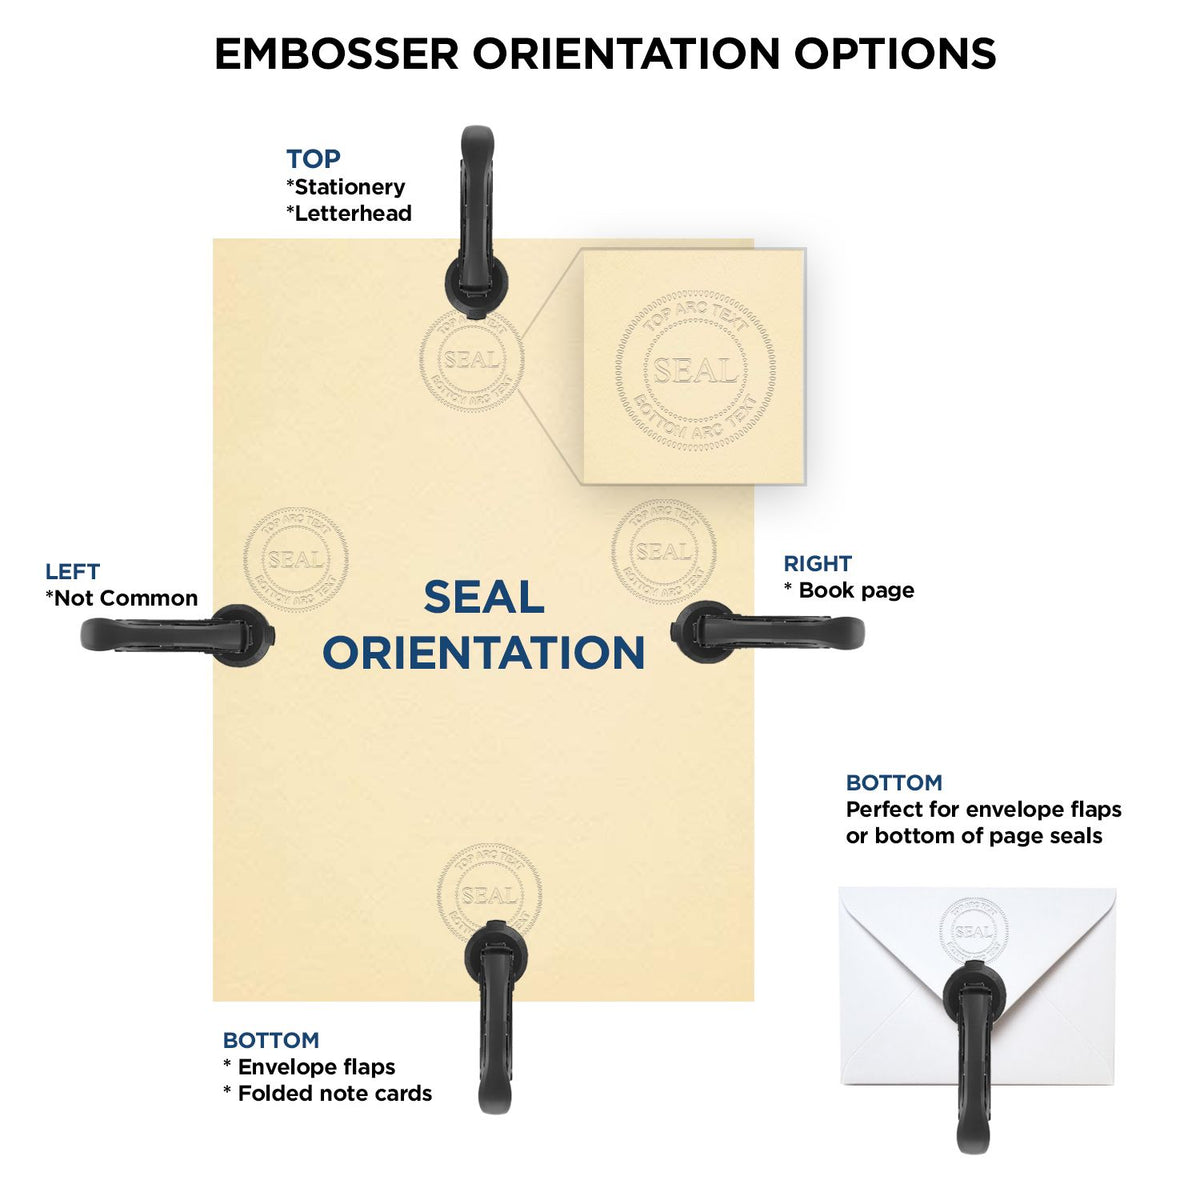 An infographic for the Heavy Duty Cast Iron North Dakota Architect Embosser showing embosser orientation, this is showing examples of a top, bottom, right and left insert.